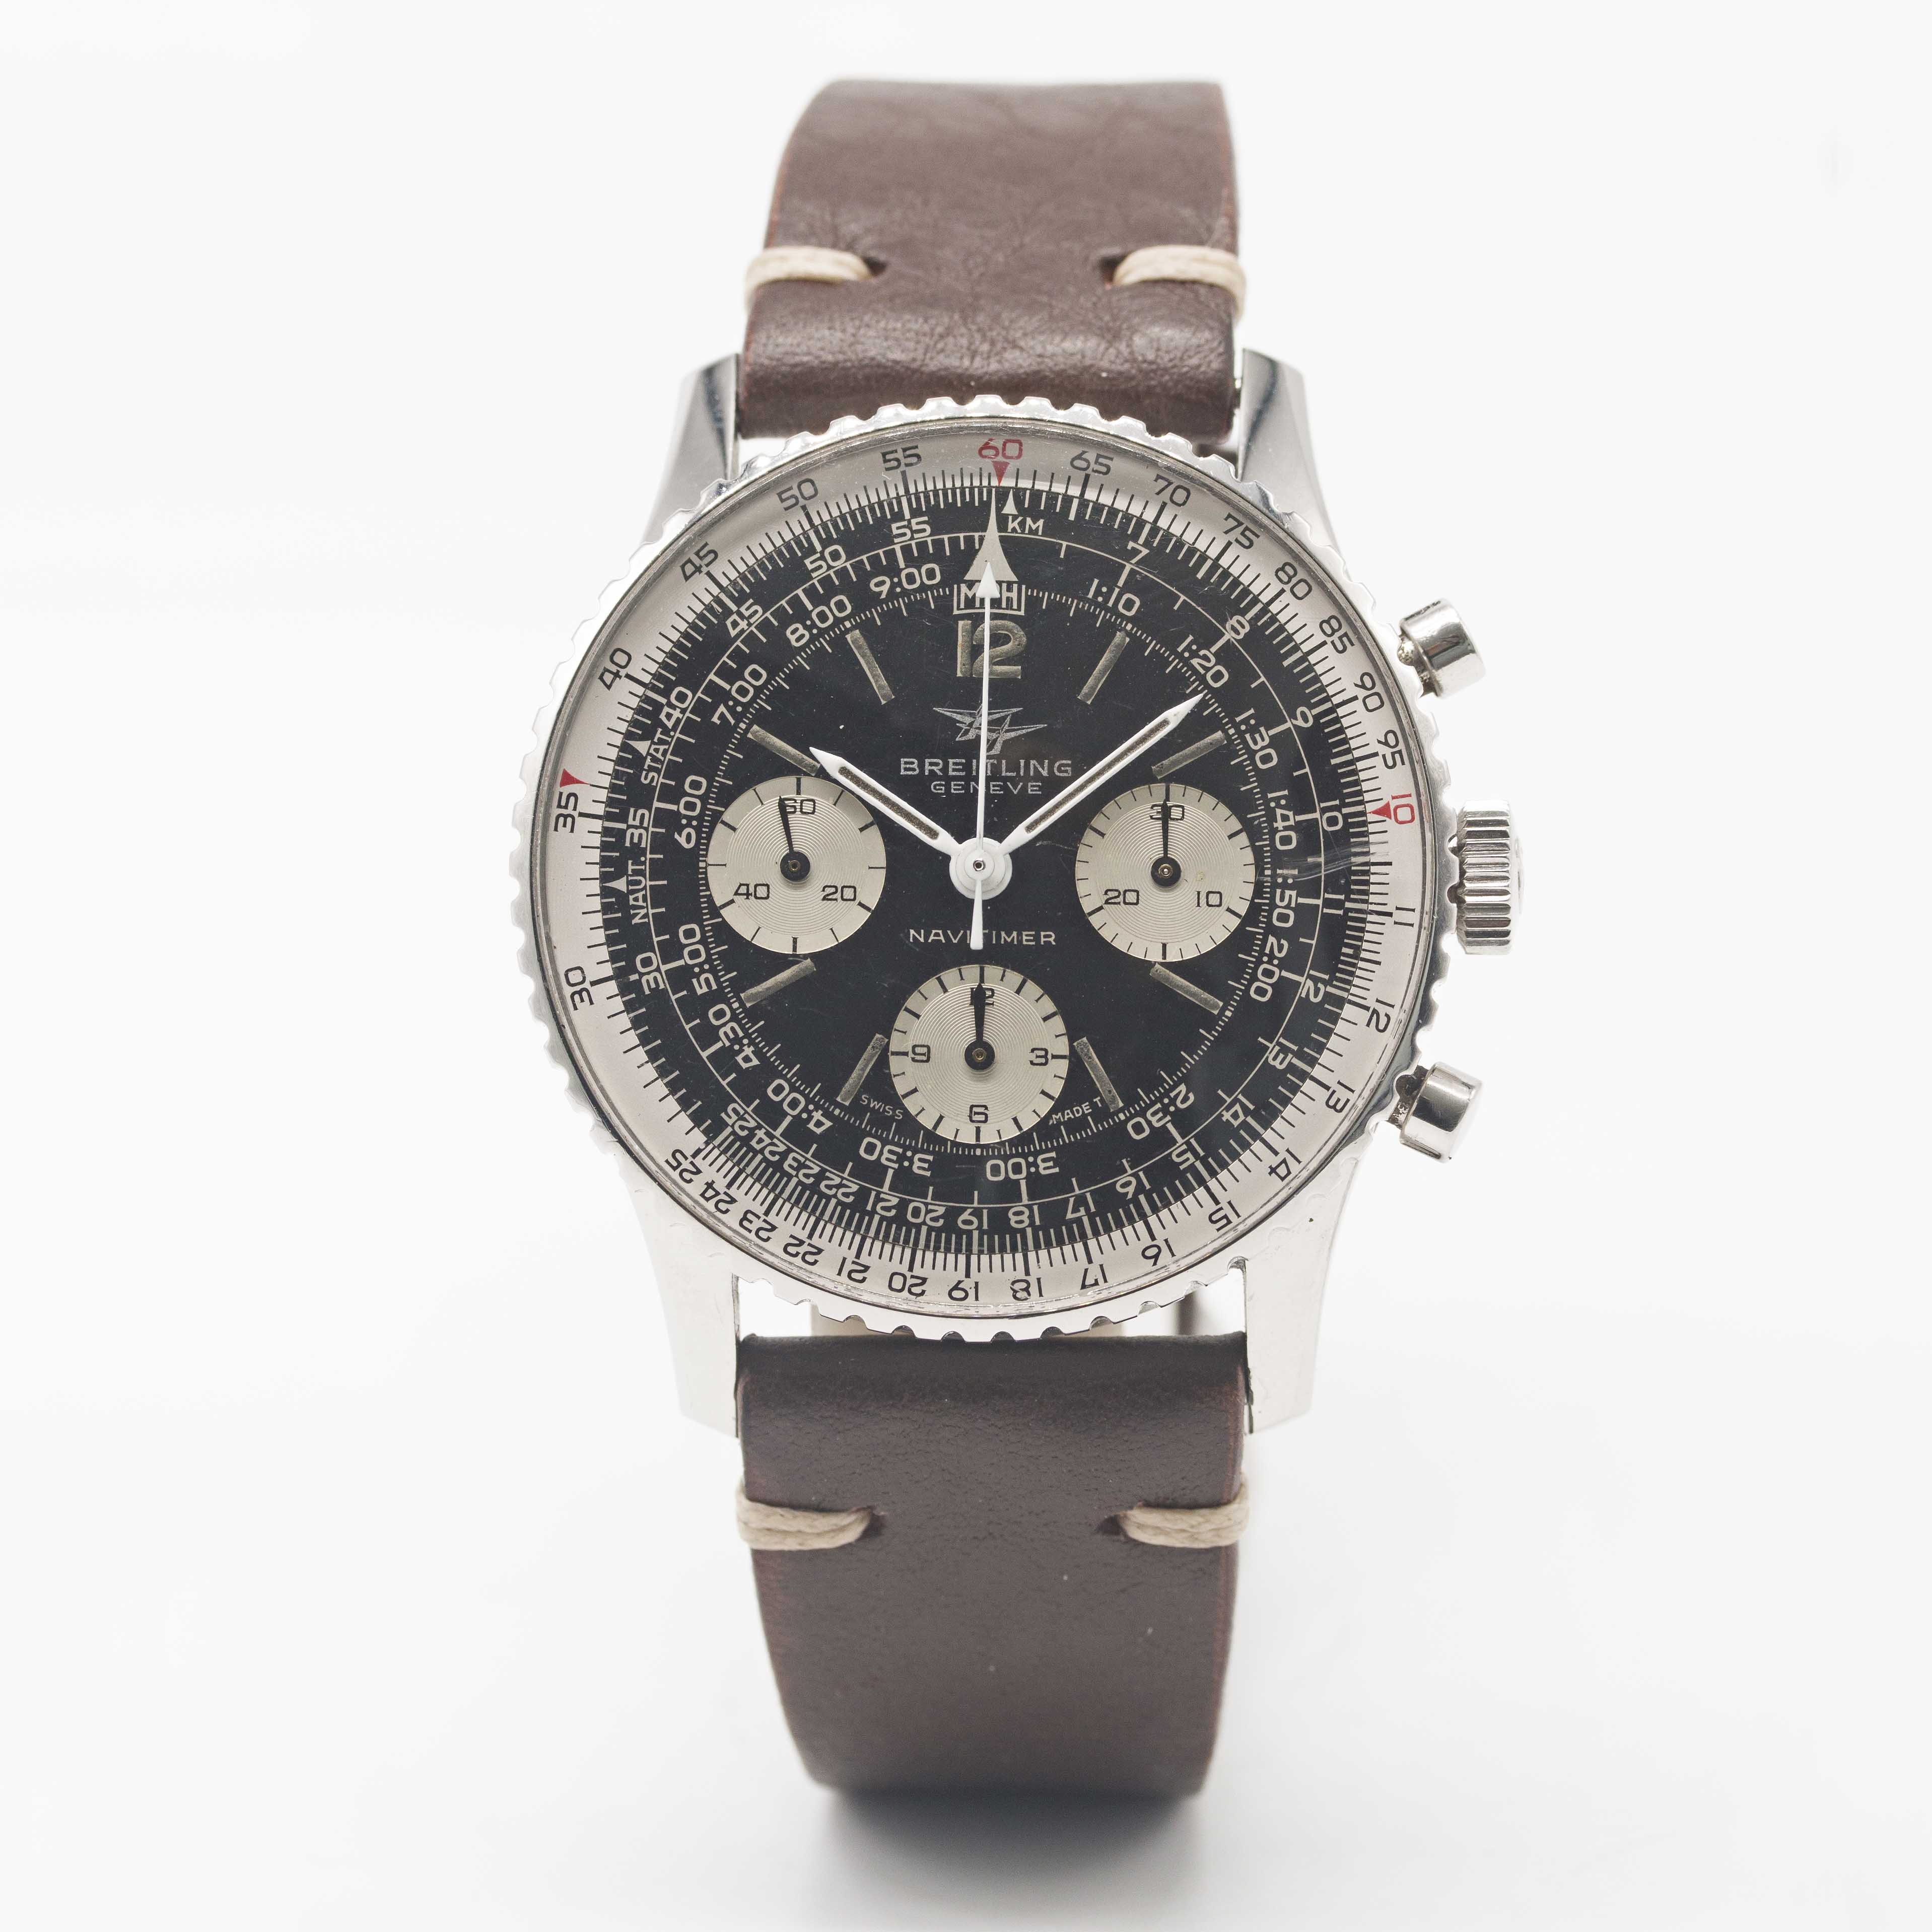 A GENTLEMAN'S STAINLESS STEEL BREITLING NAVITIMER CHRONOGRAPH WRIST WATCH CIRCA 1966, REF. 806 - Image 2 of 9